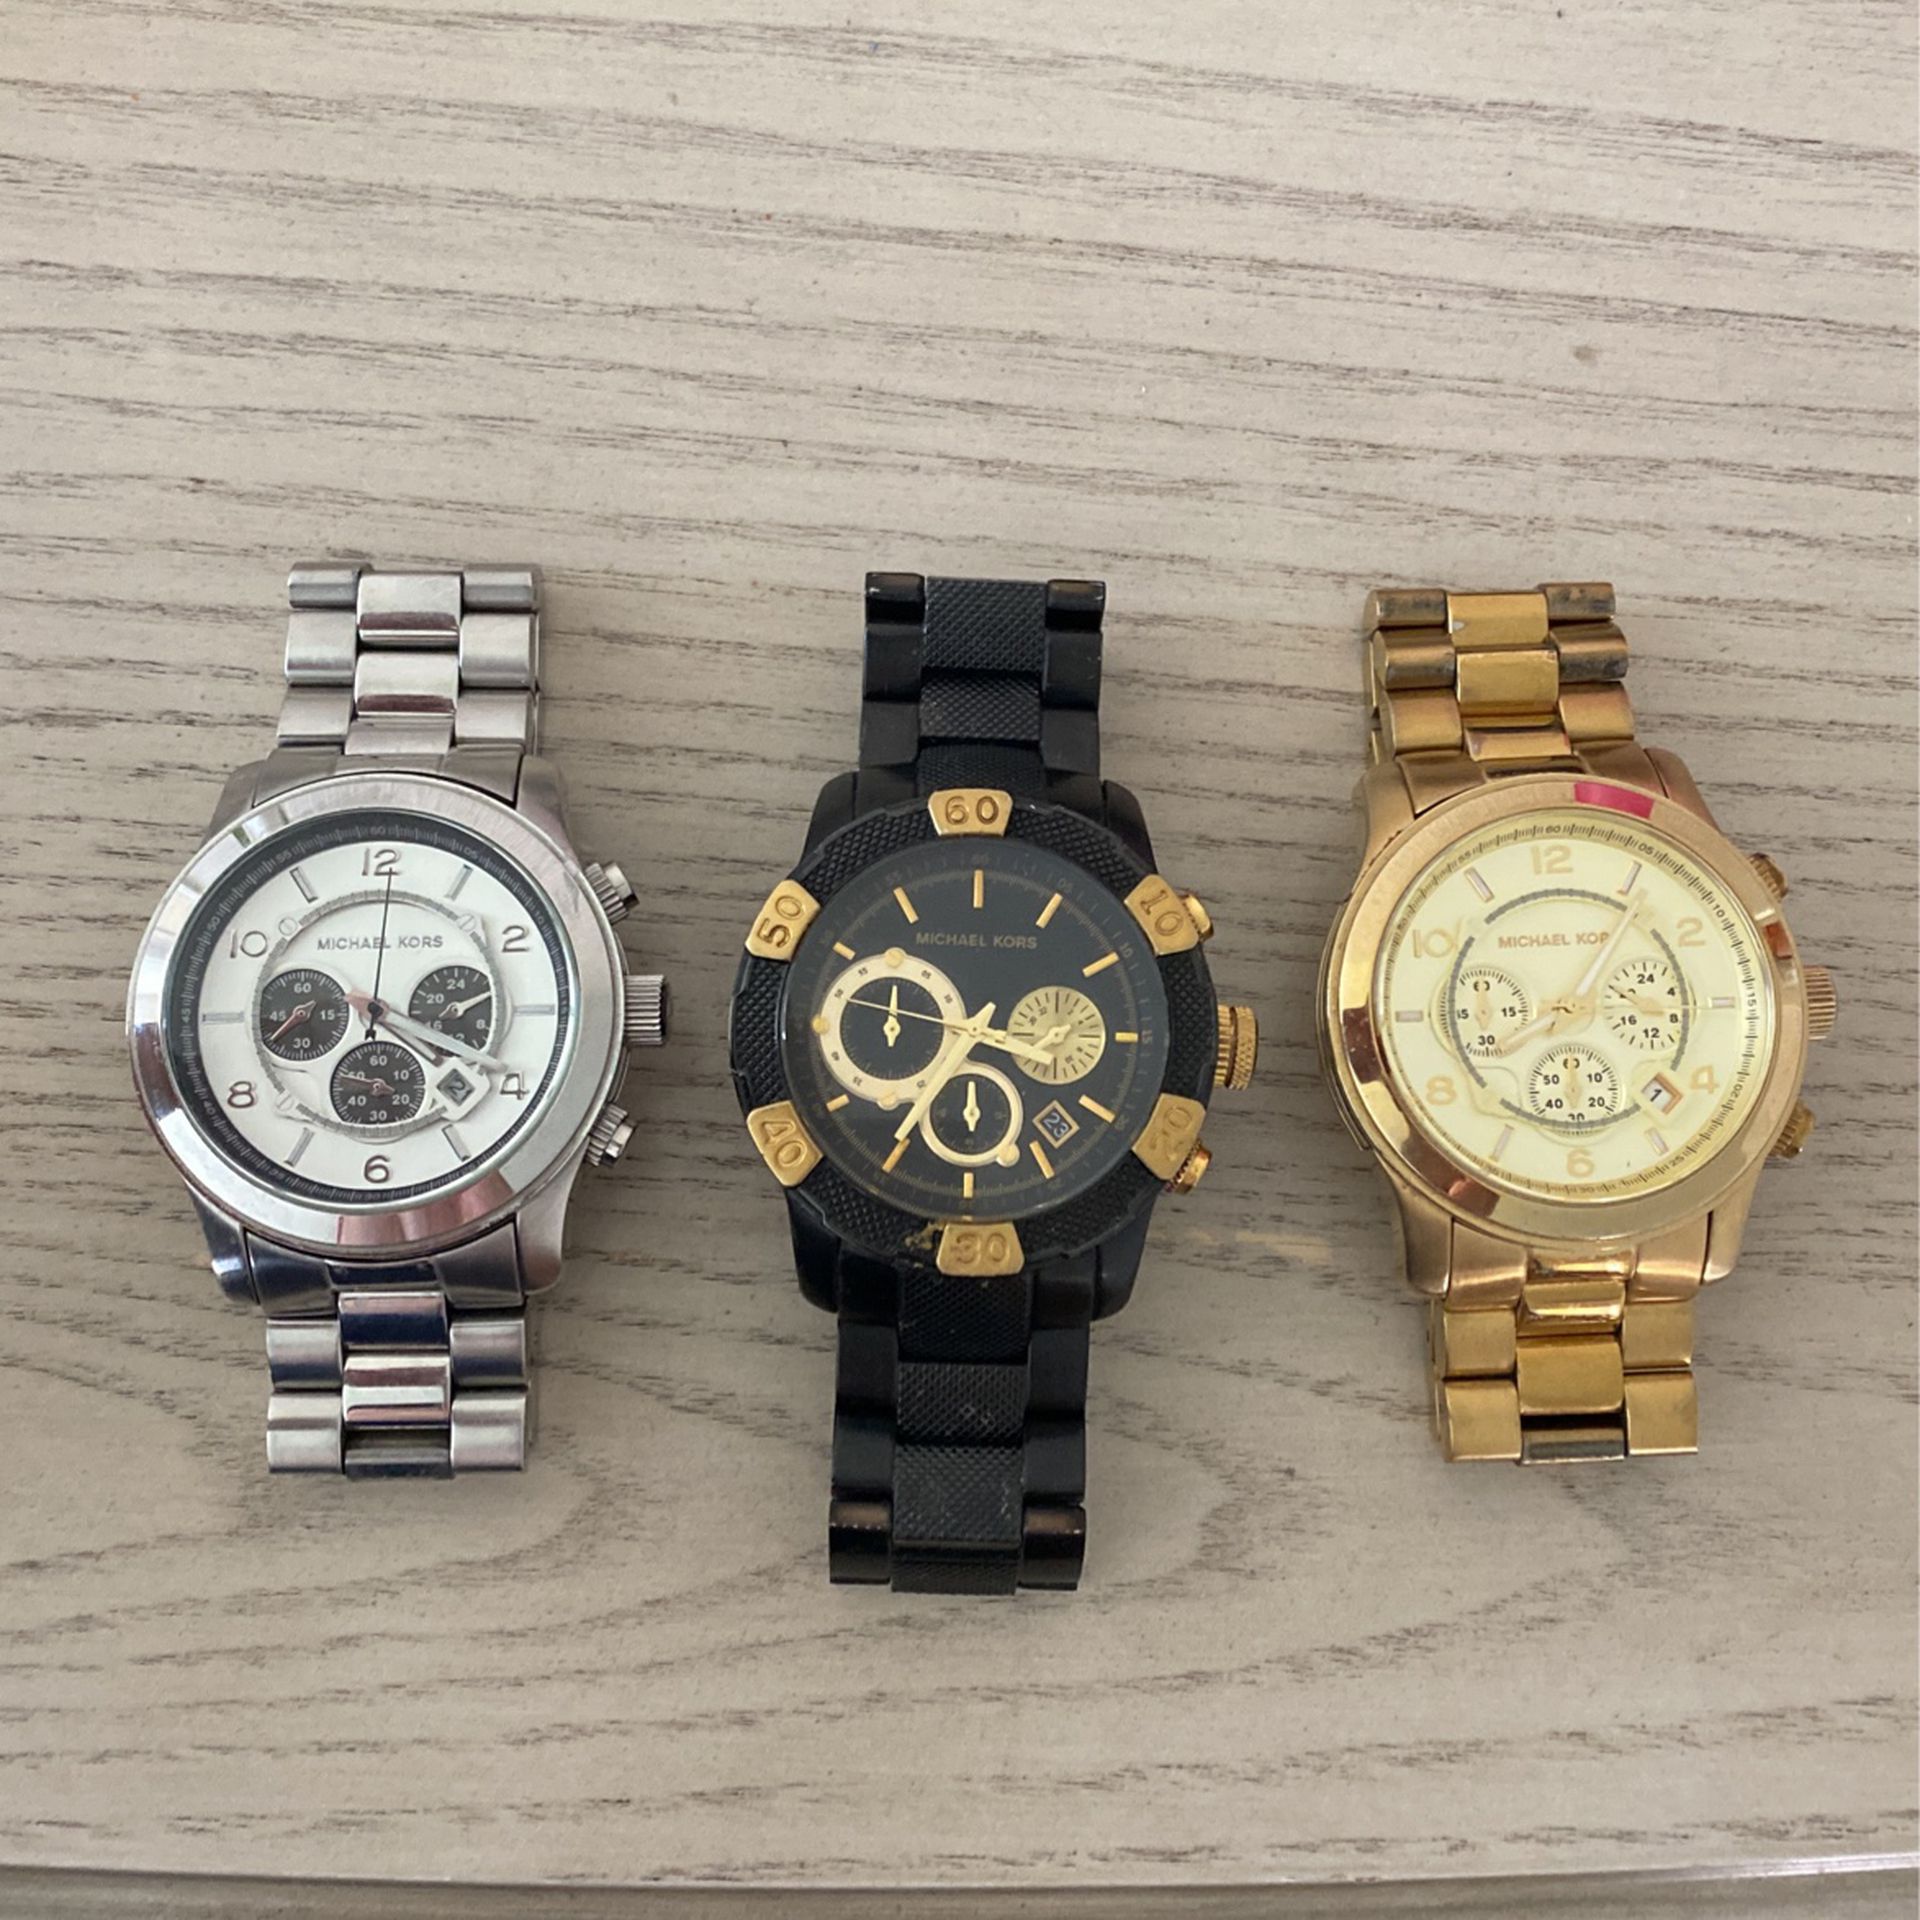 Michael Kors Watches. for Sale in El Paso, TX - OfferUp